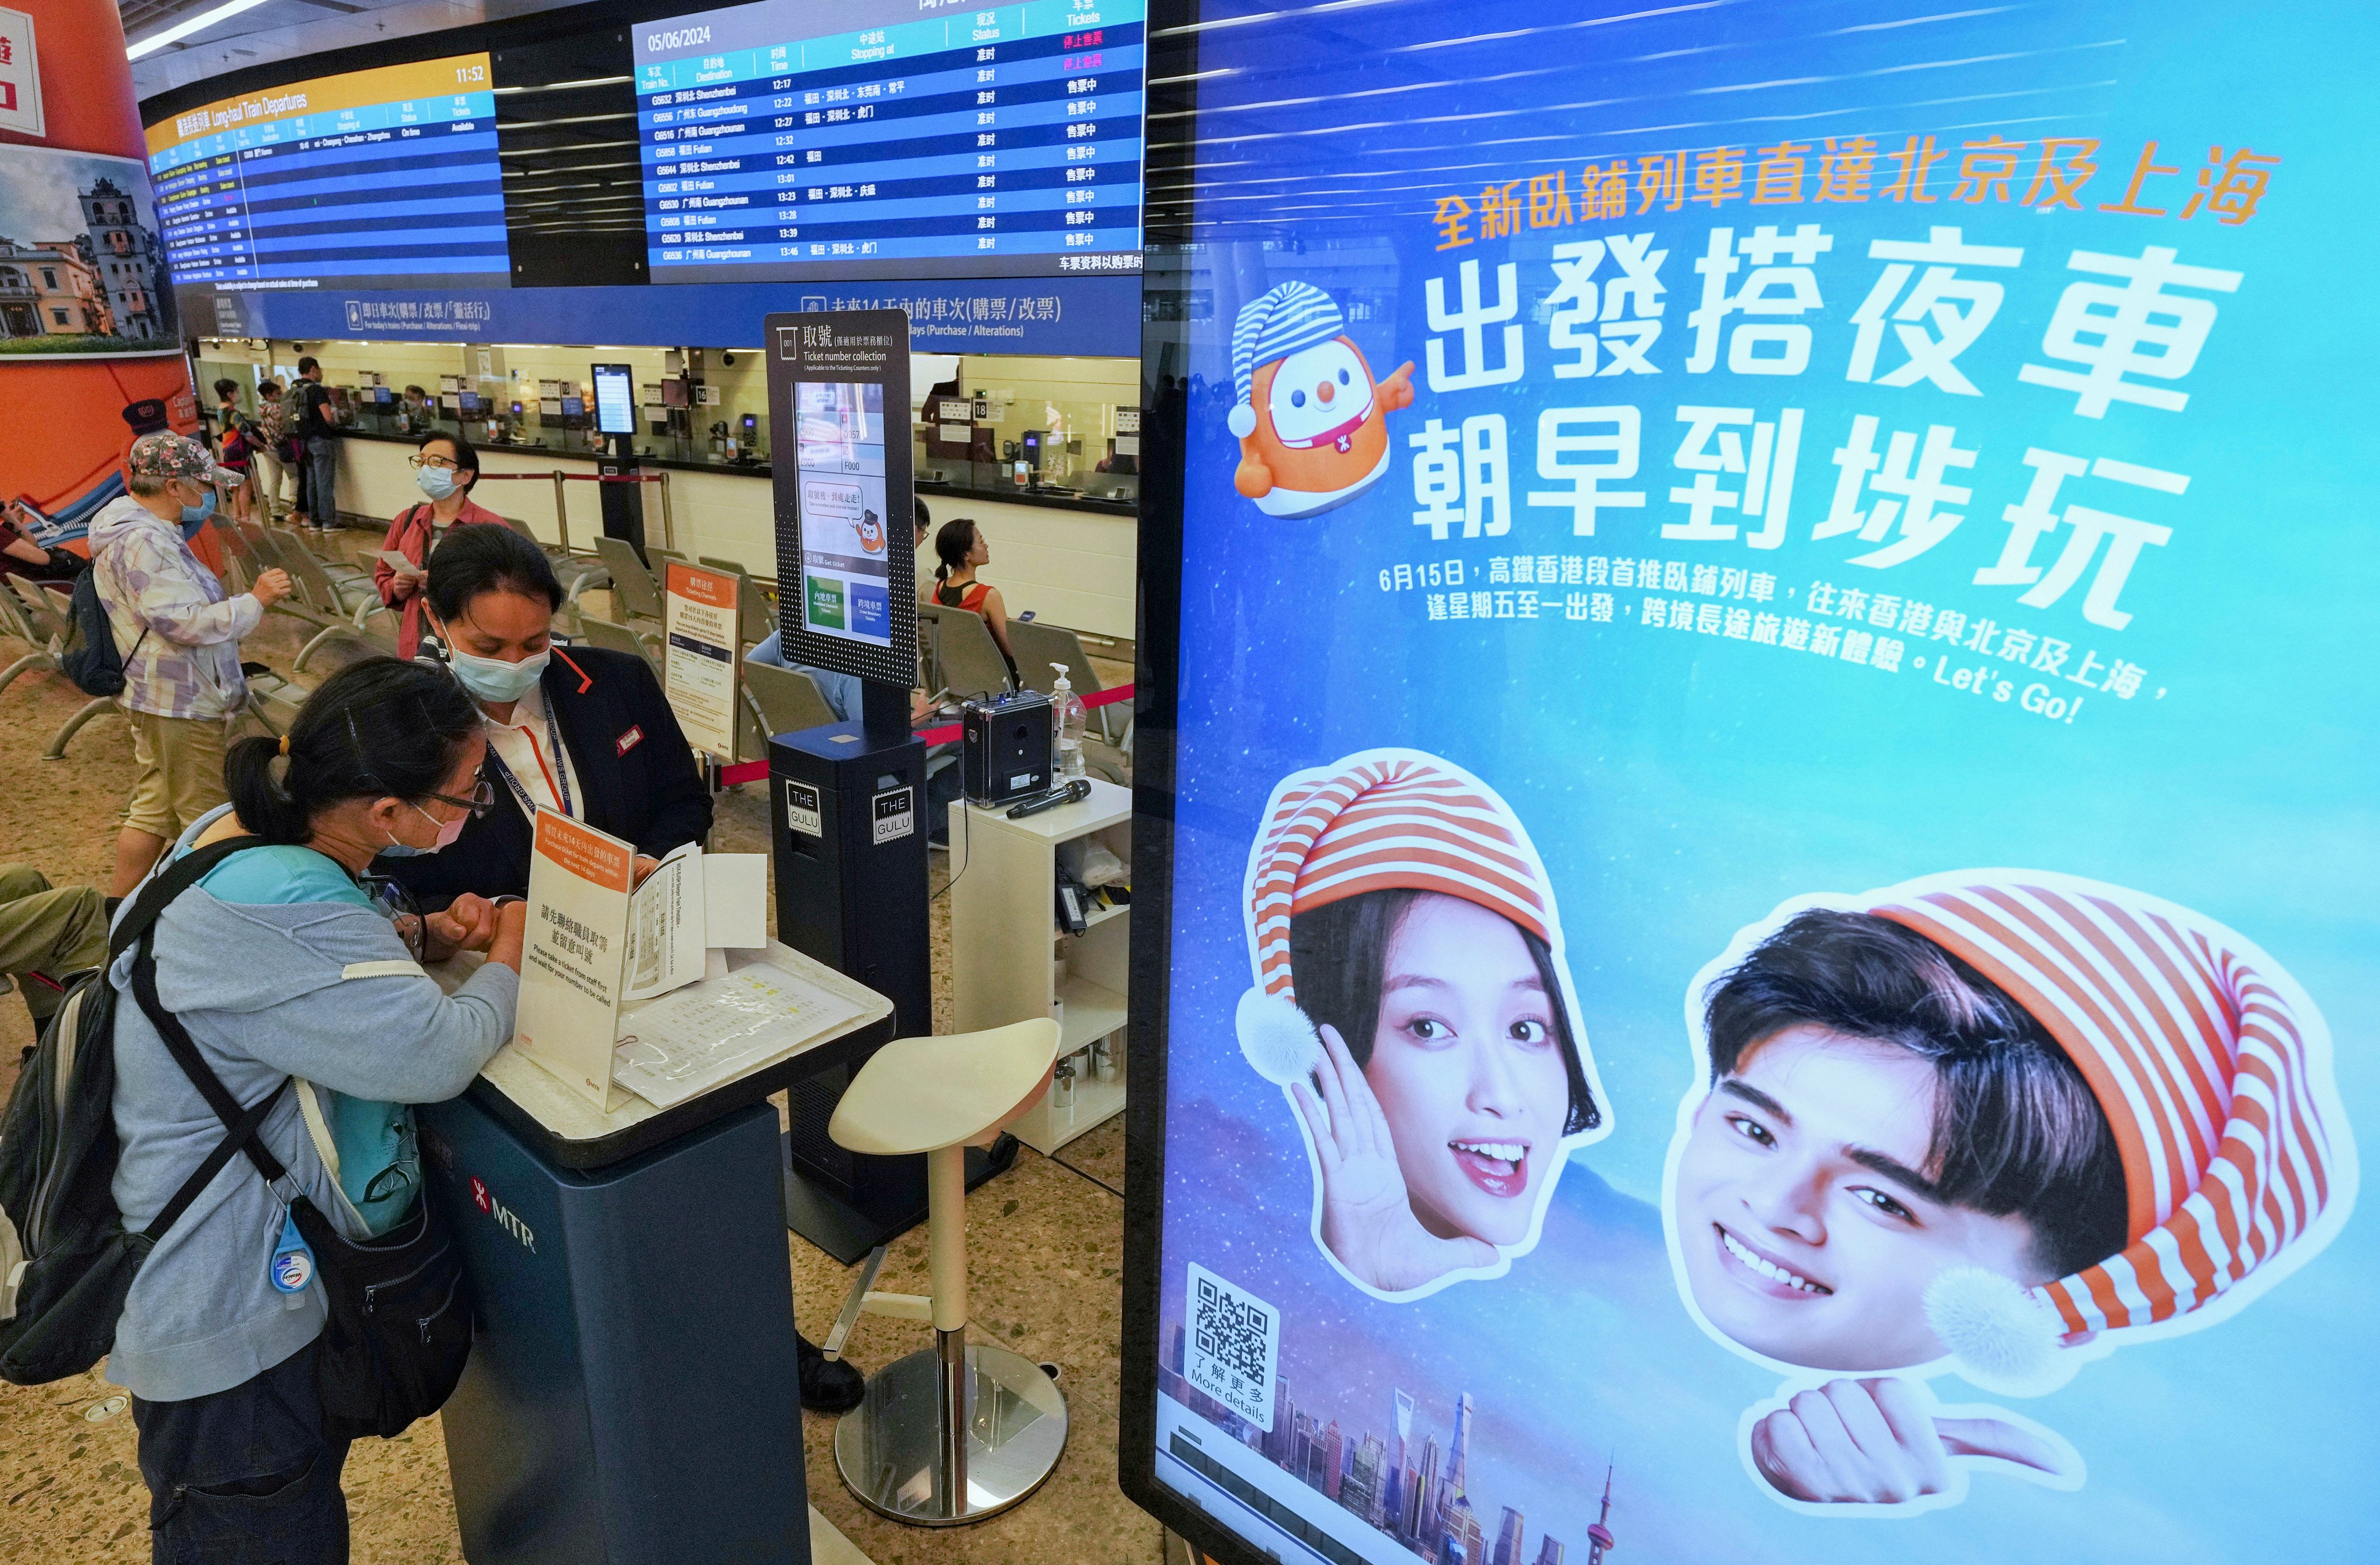 Customers at West Kowloon station looking to buy tickets for the newly launched high-speed sleeper trains connecting to Shanghai and Beijing. Photo: Elson Li